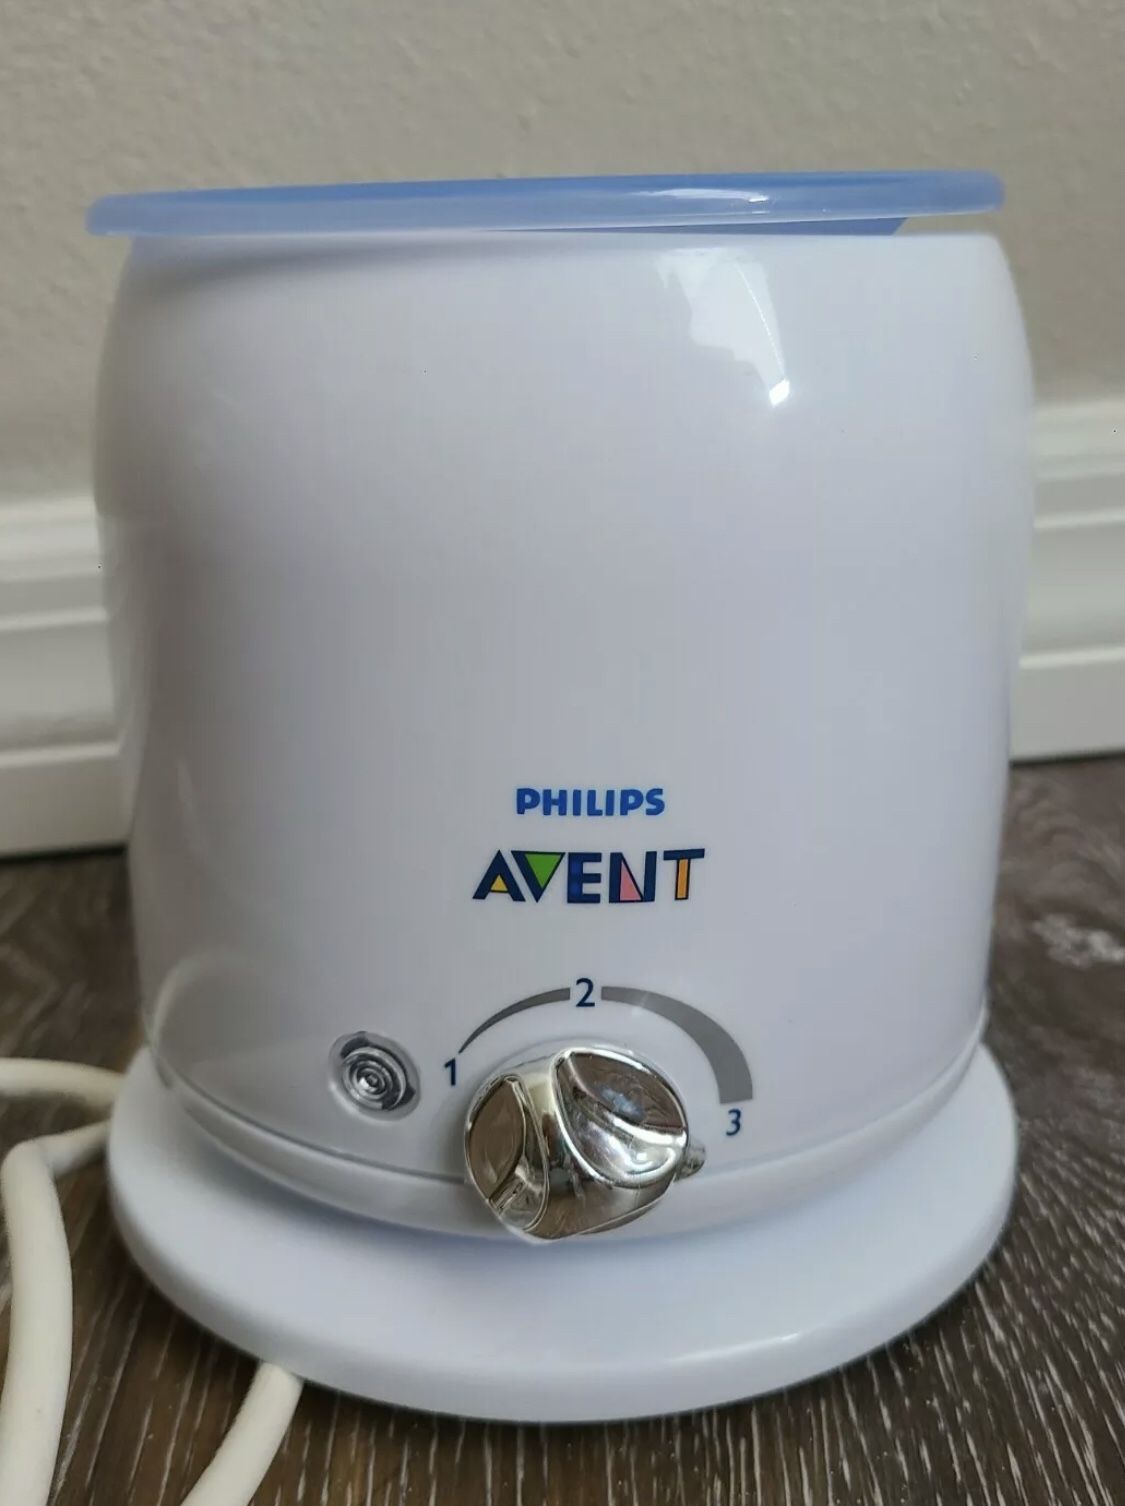 Philips AVENT Electric Bottle and Baby Food Warmer 